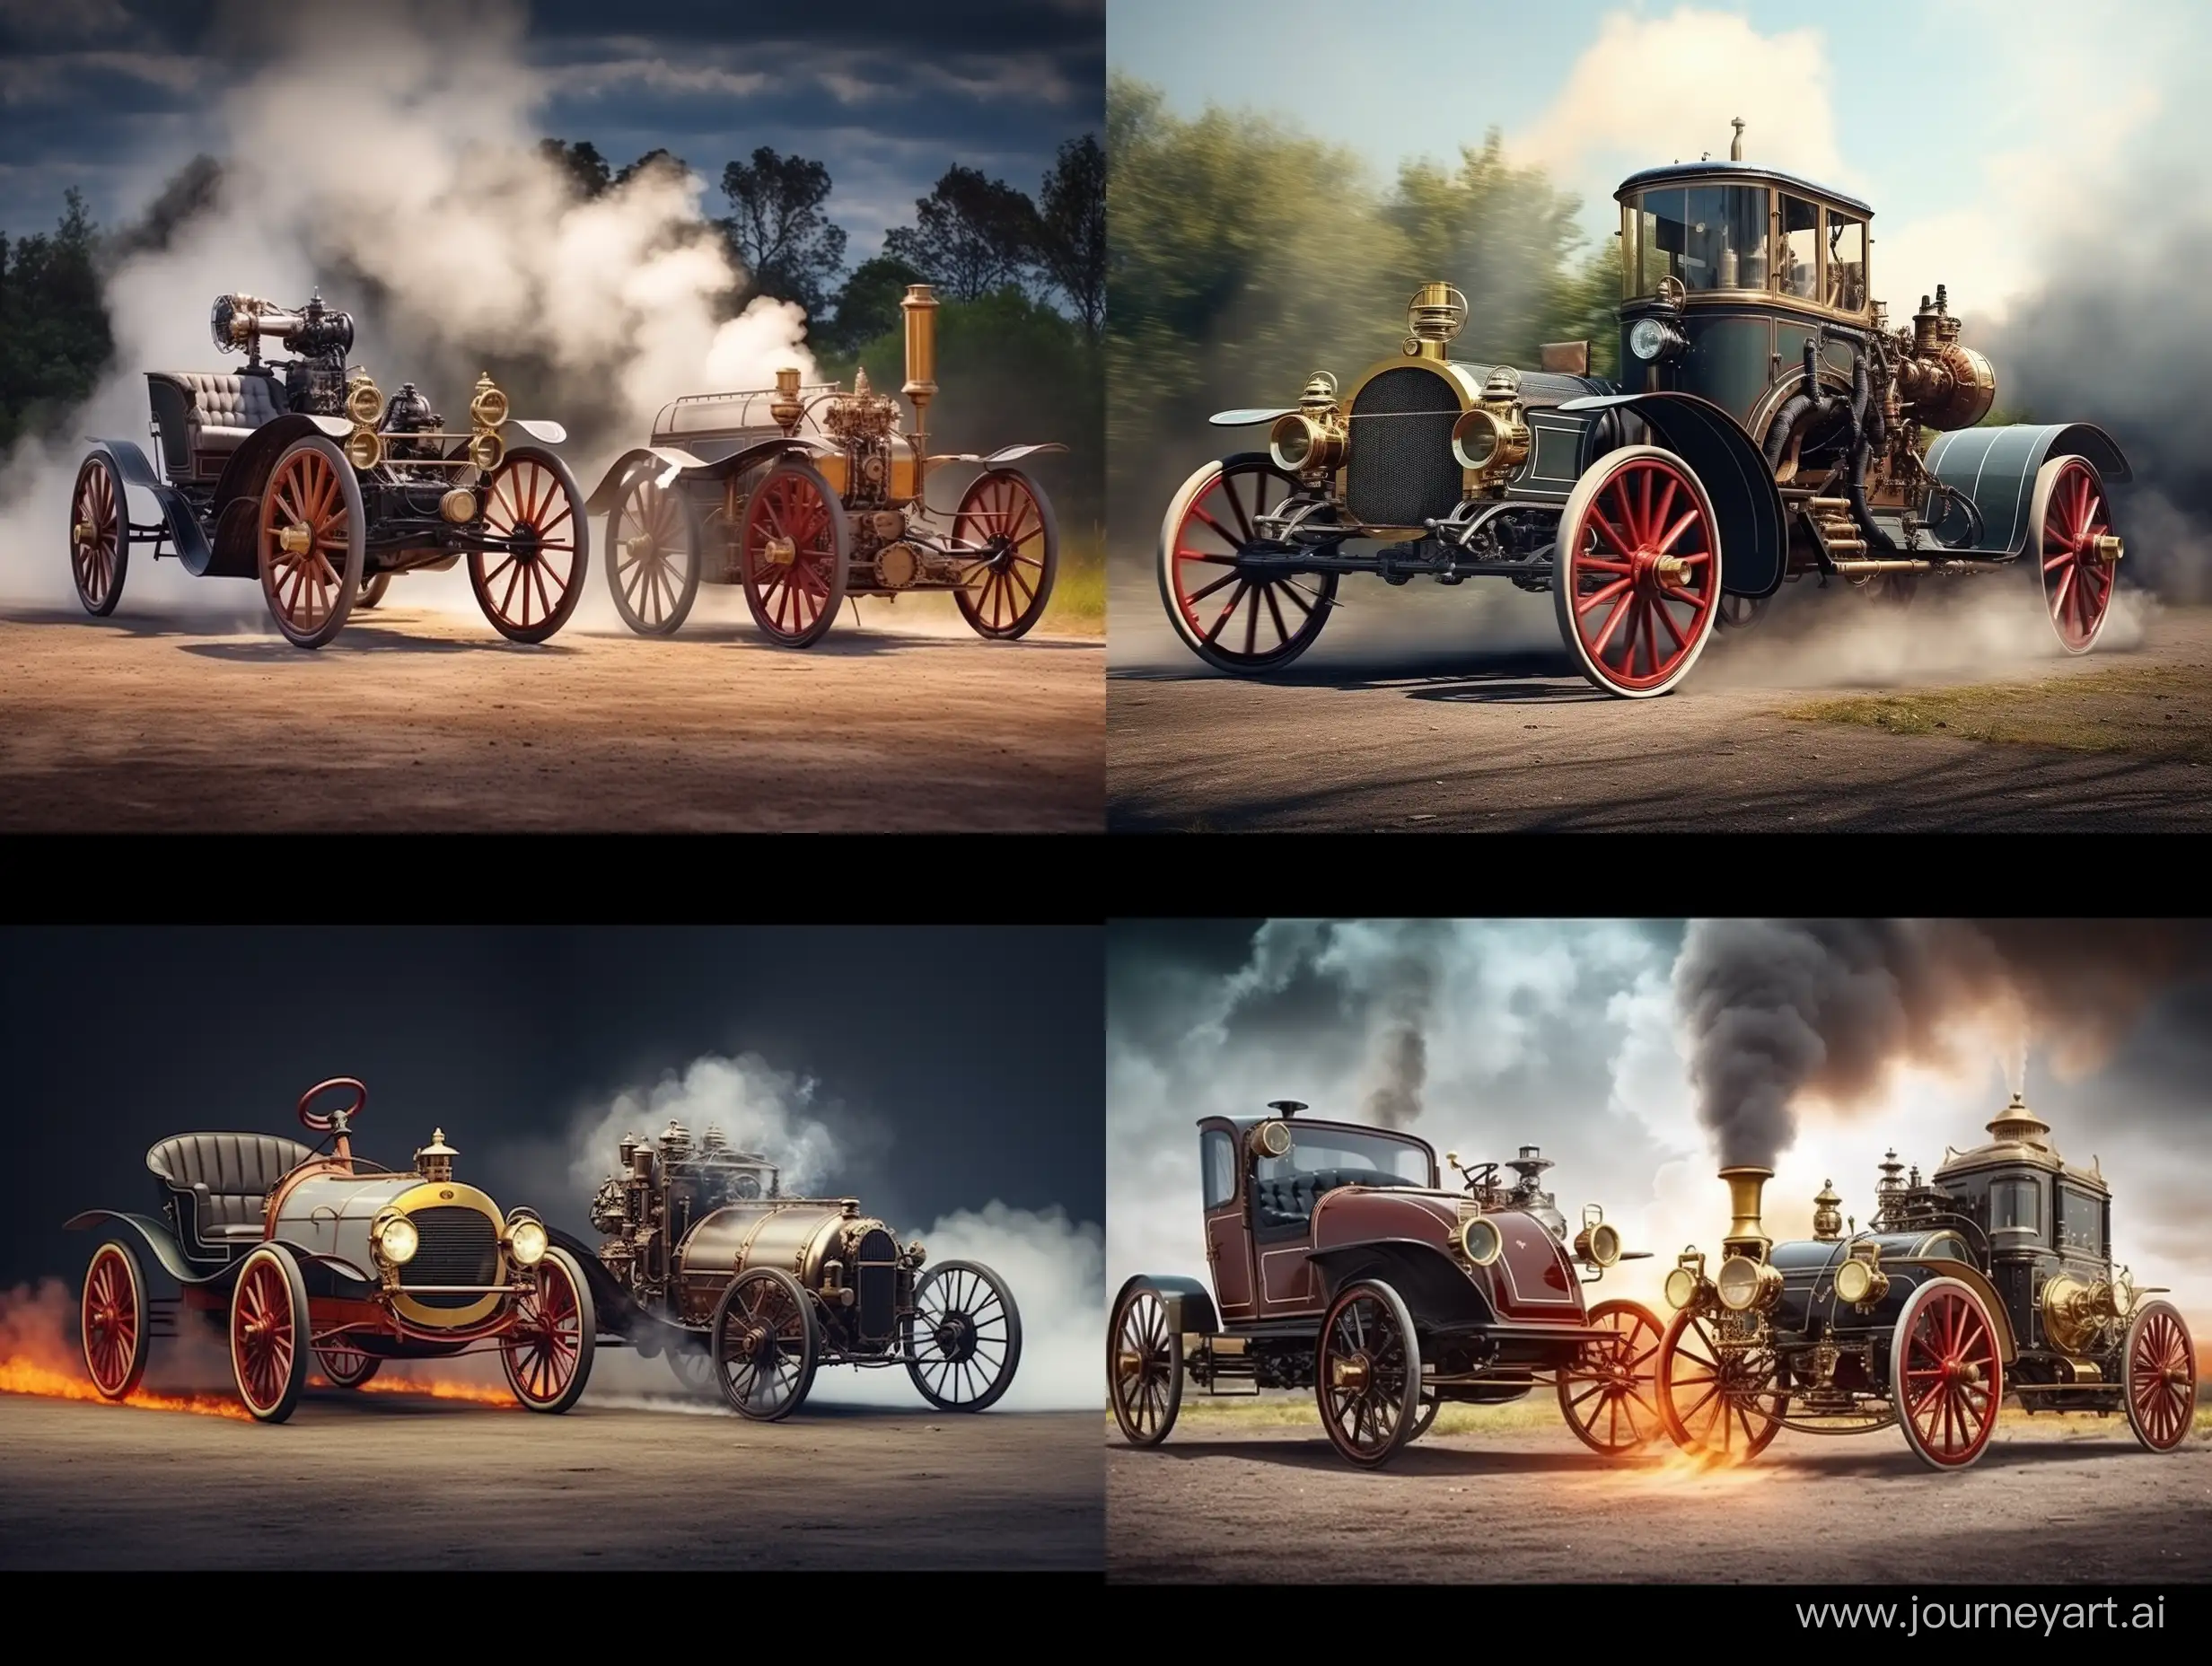 Contrast-between-SteamPowered-Vintage-Car-and-Modern-Automobiles